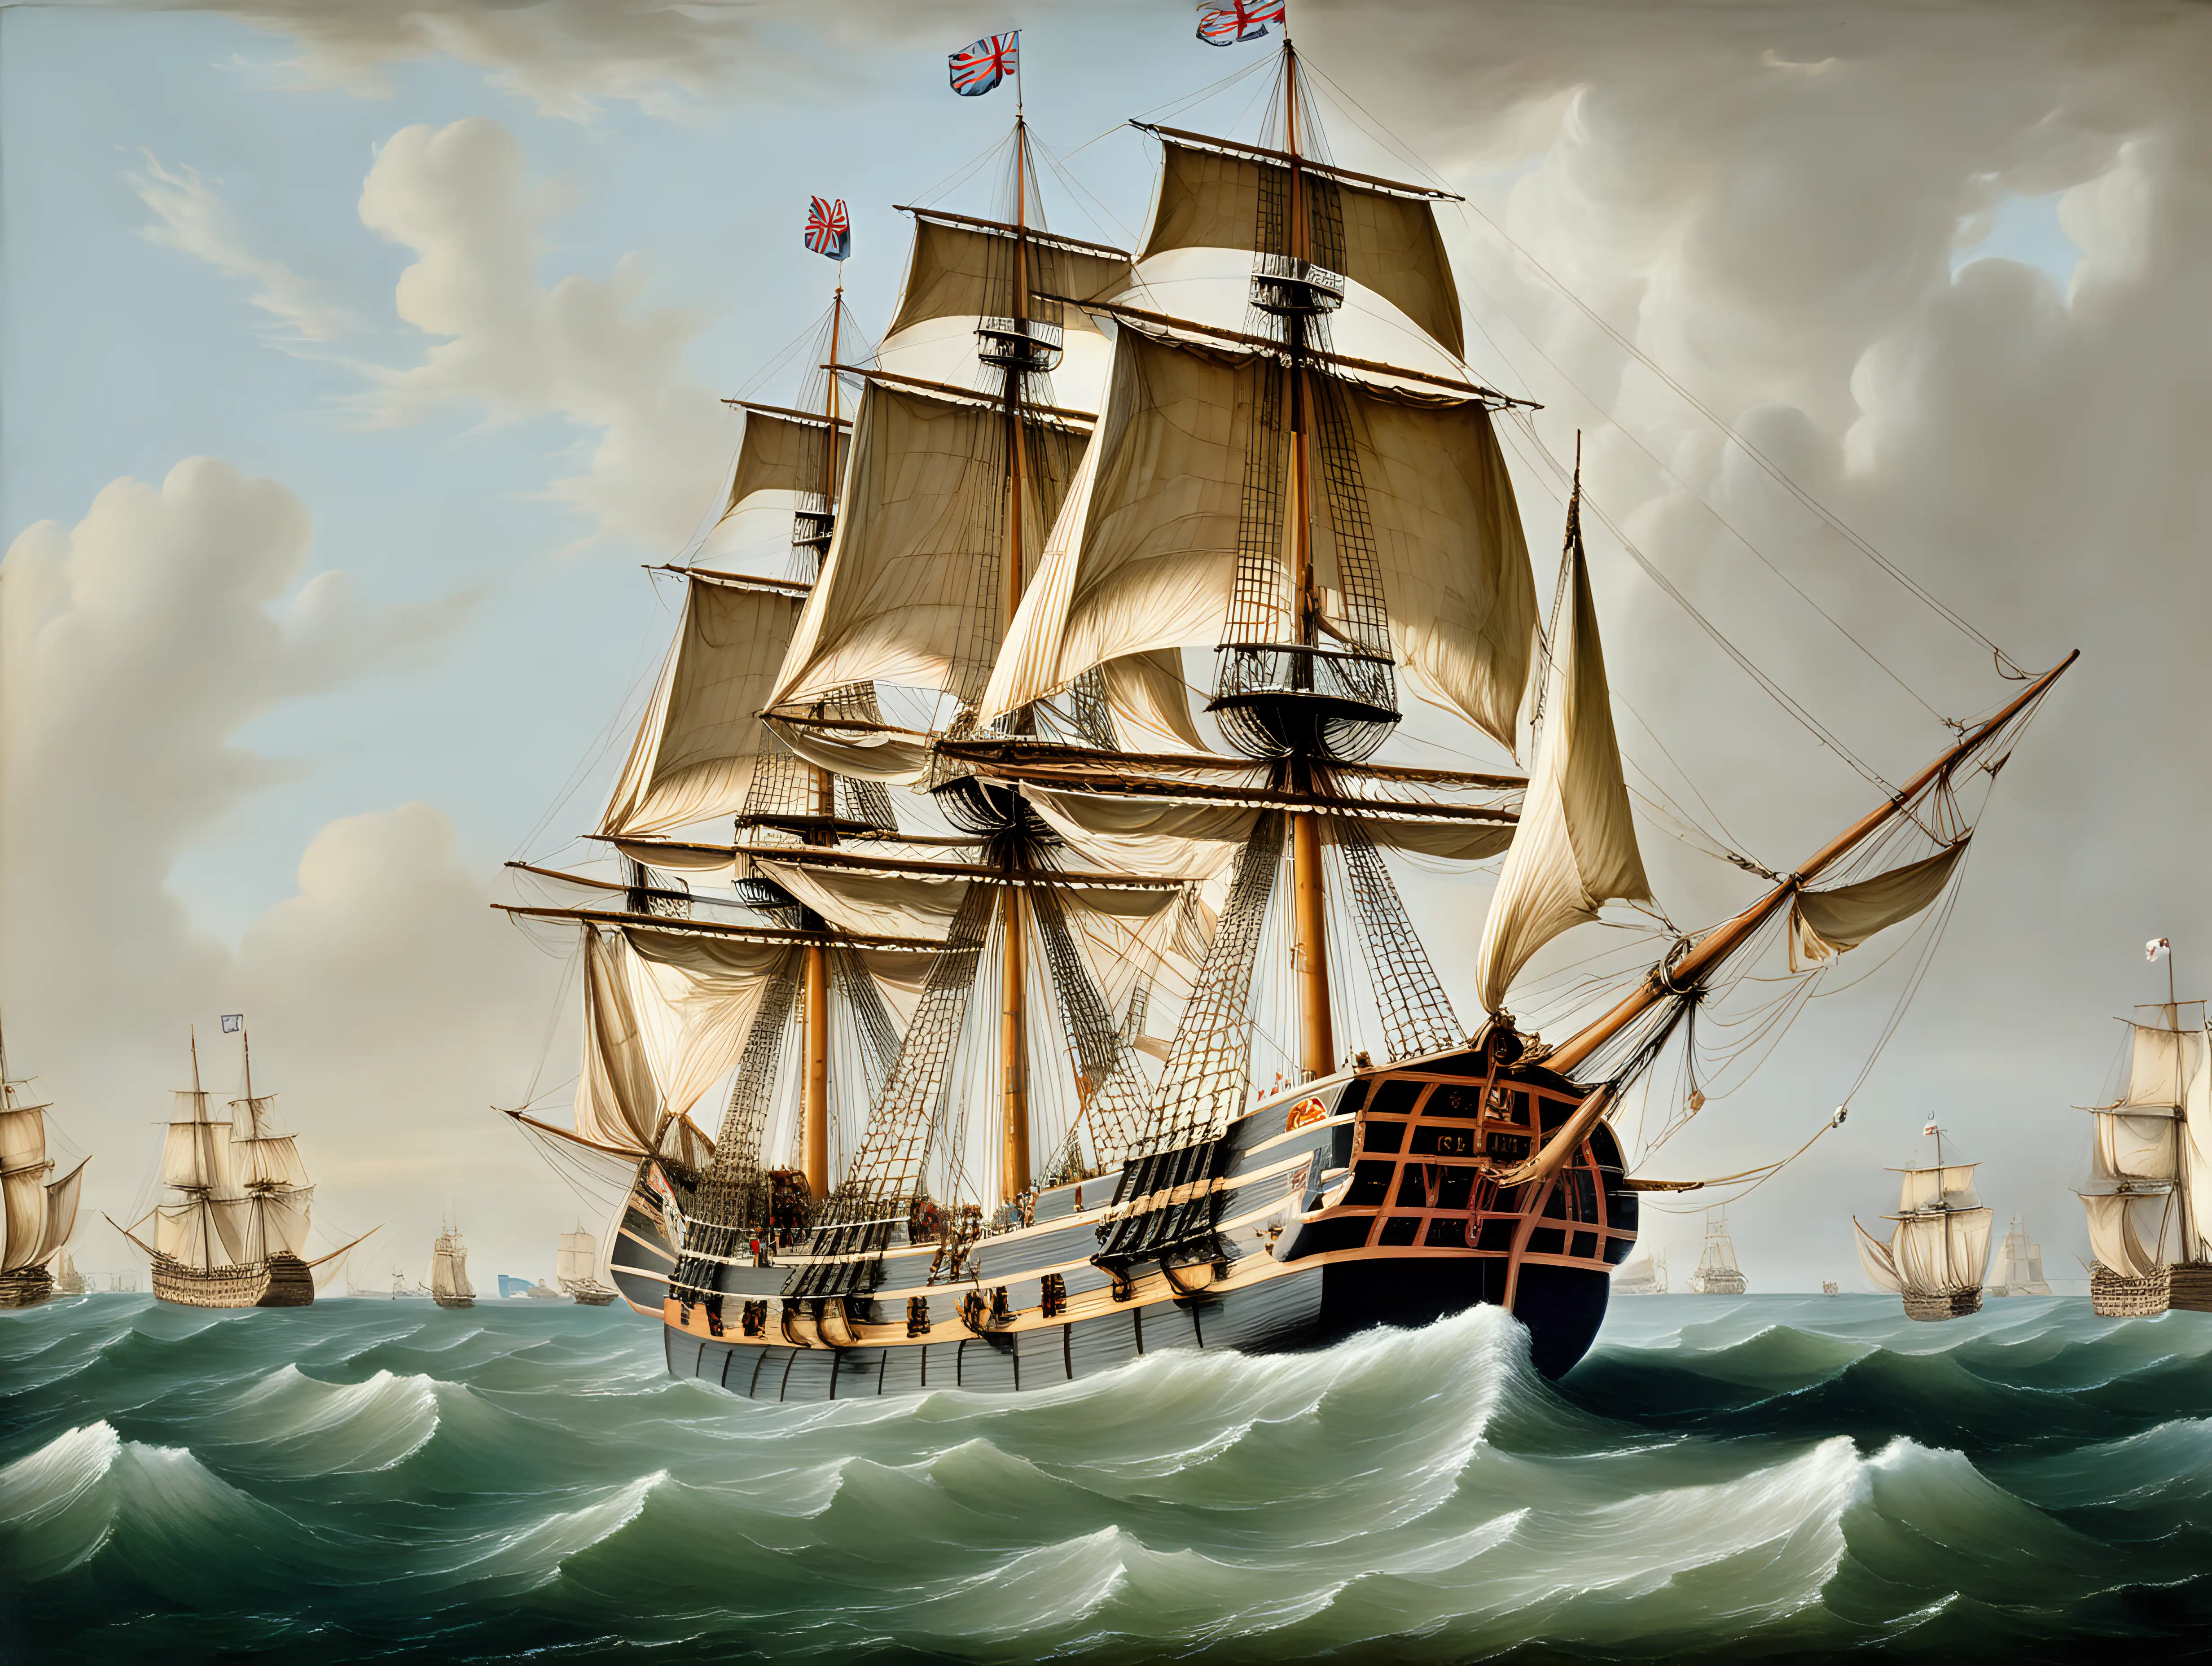 Colorful Depiction of a 1650s British Trading Ship at Sea